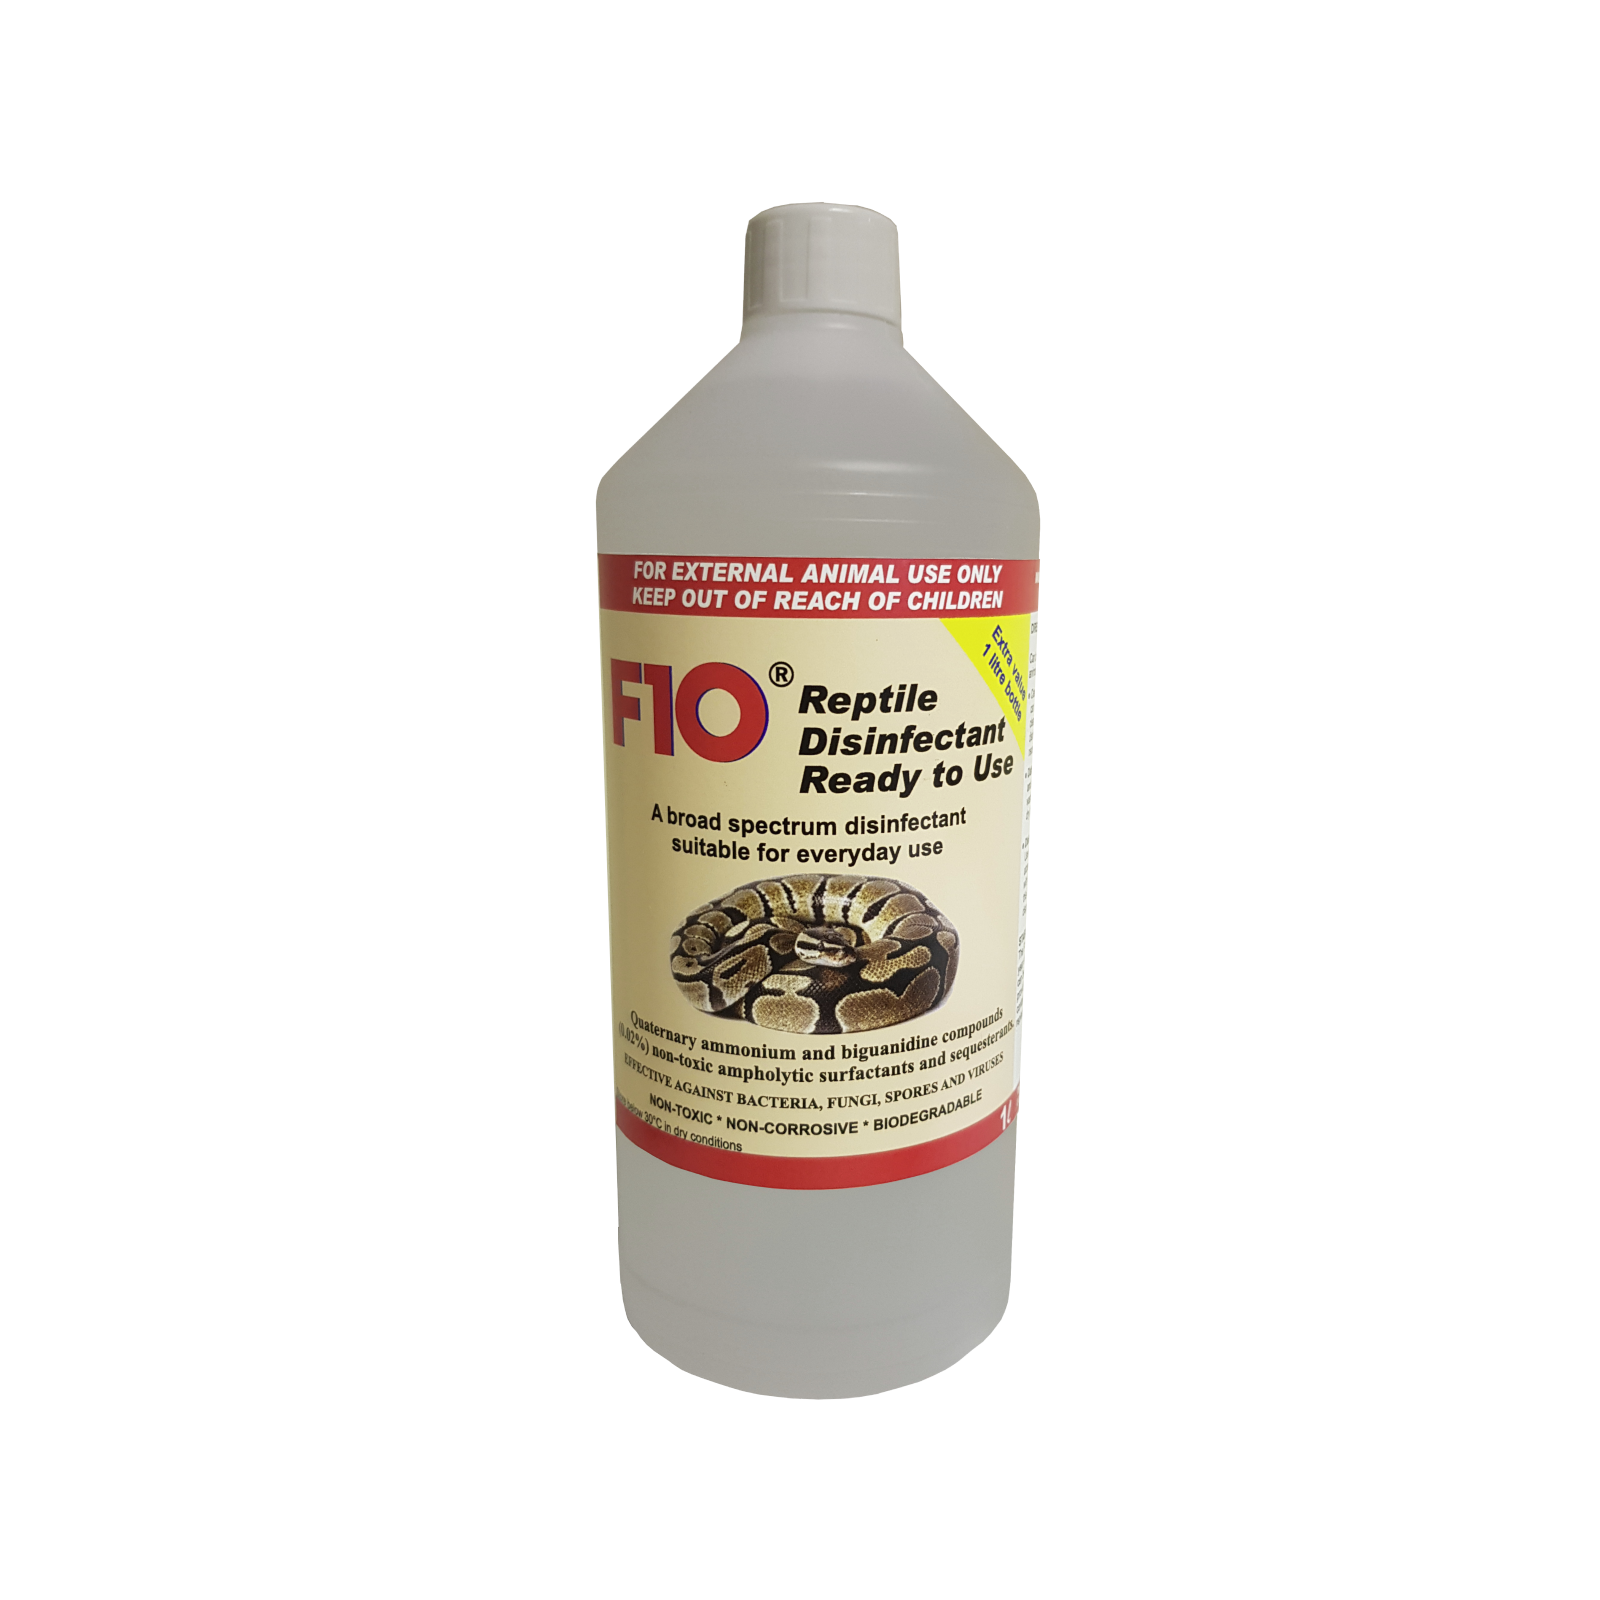 A 1 litre bottle of F10 Reptile Disinfectant Ready to Use 